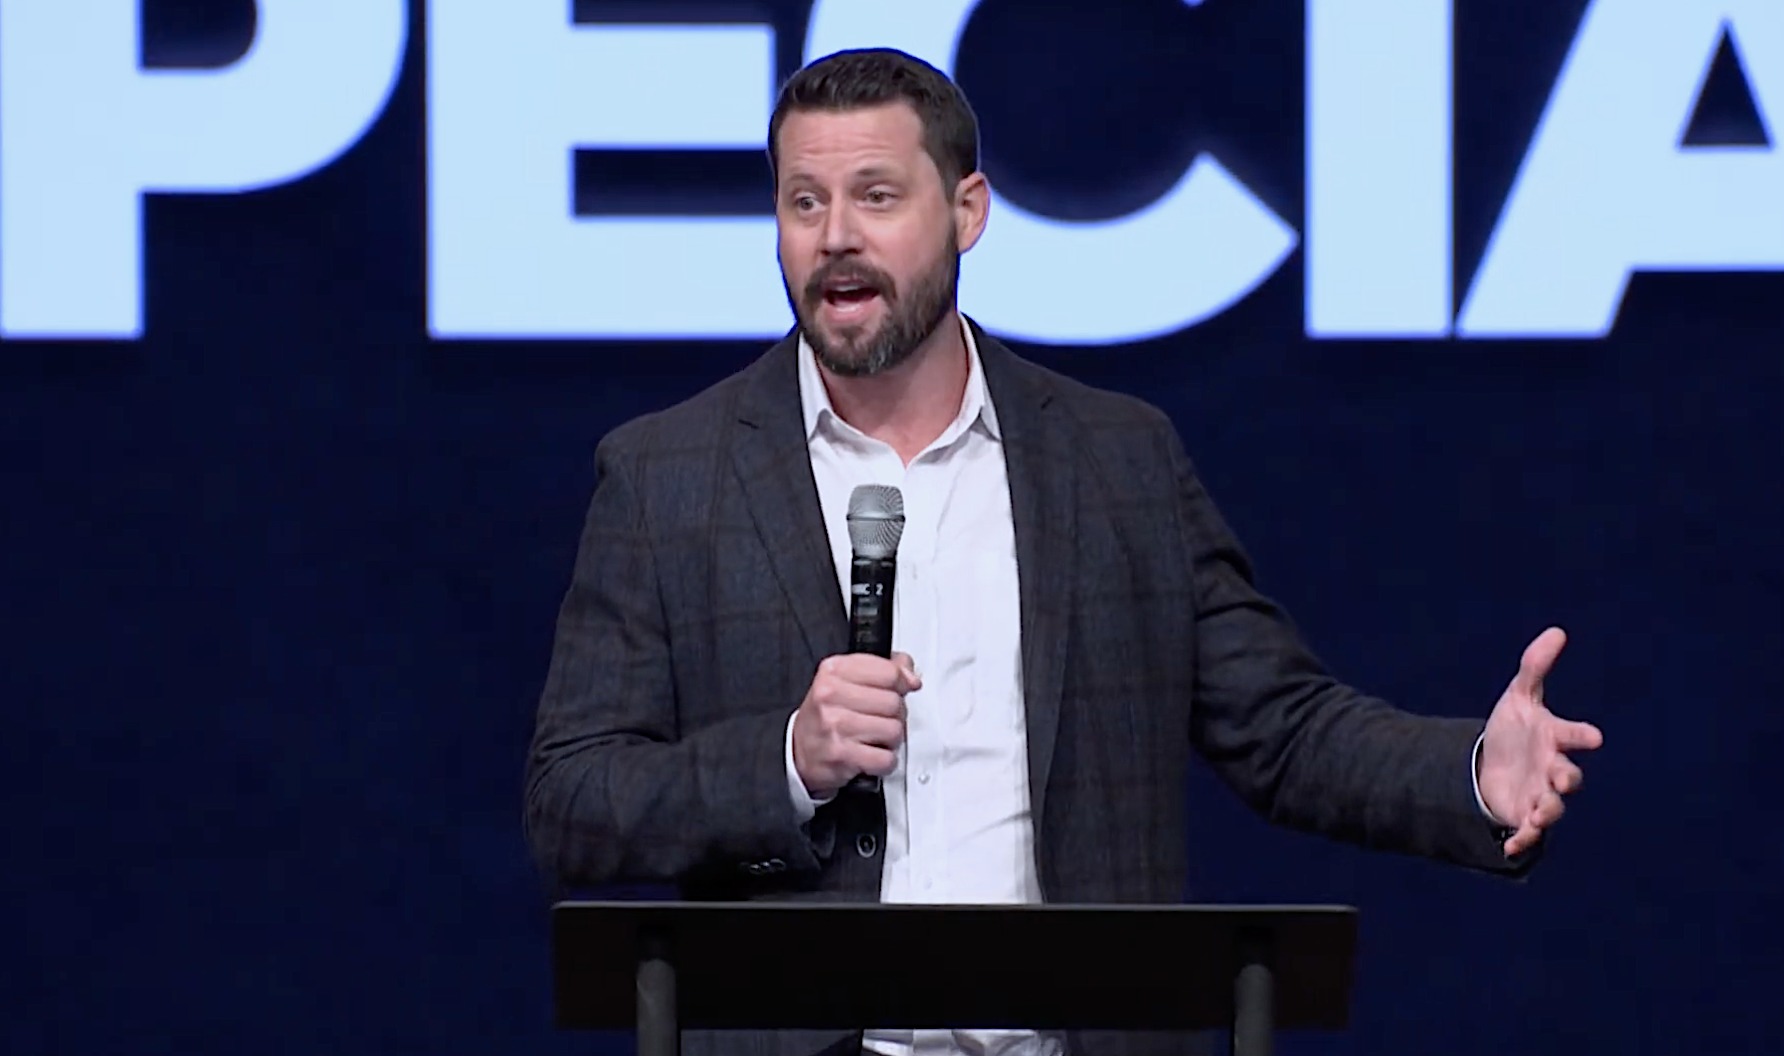 Babylon Bee CEO tells megachurch the 'truth is under attack' in America